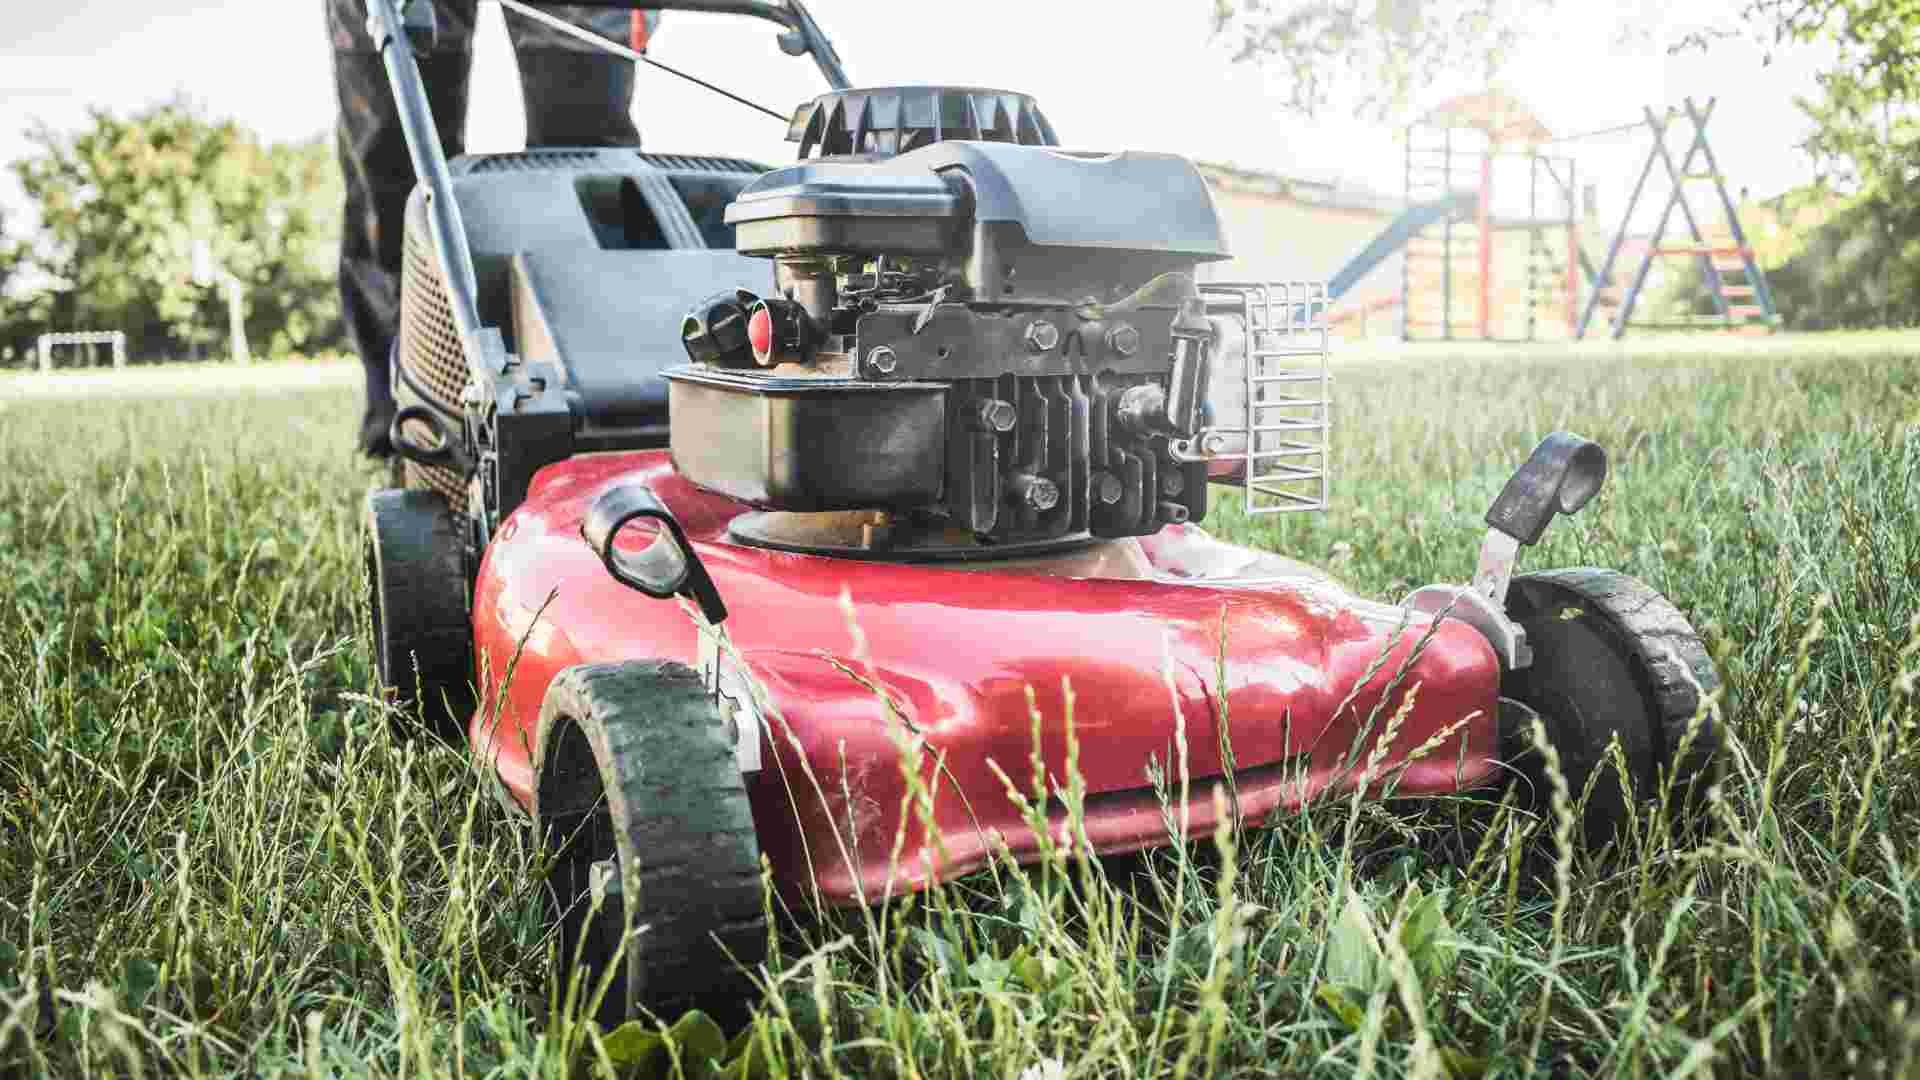 Close up of a red and black compact lawn mower in a residential yard